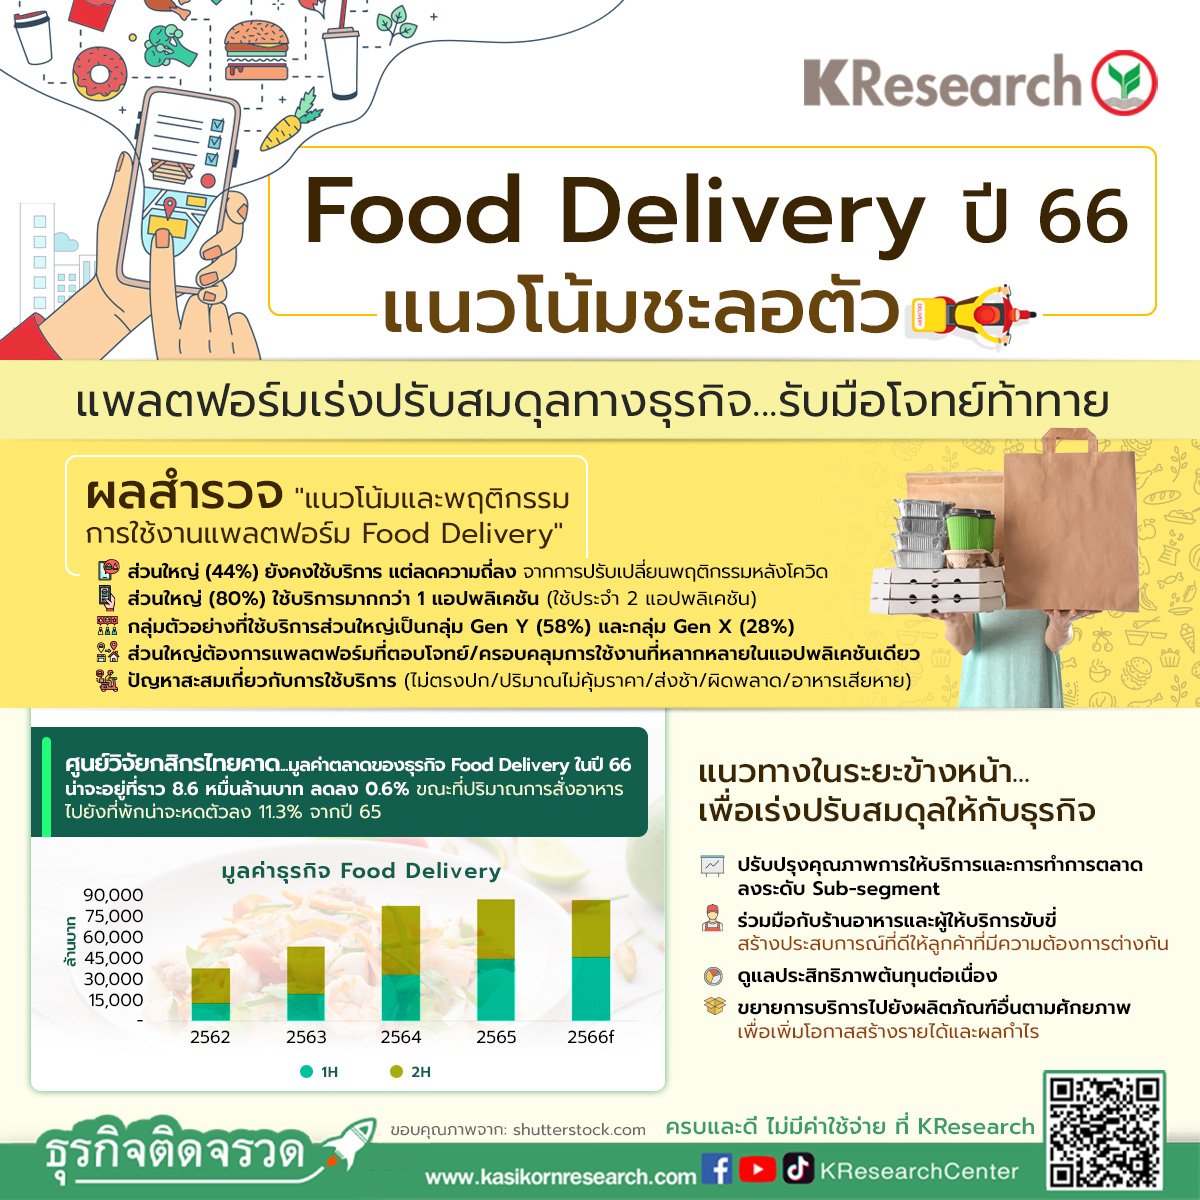 Food Delivery ปี66ชะลอตัว